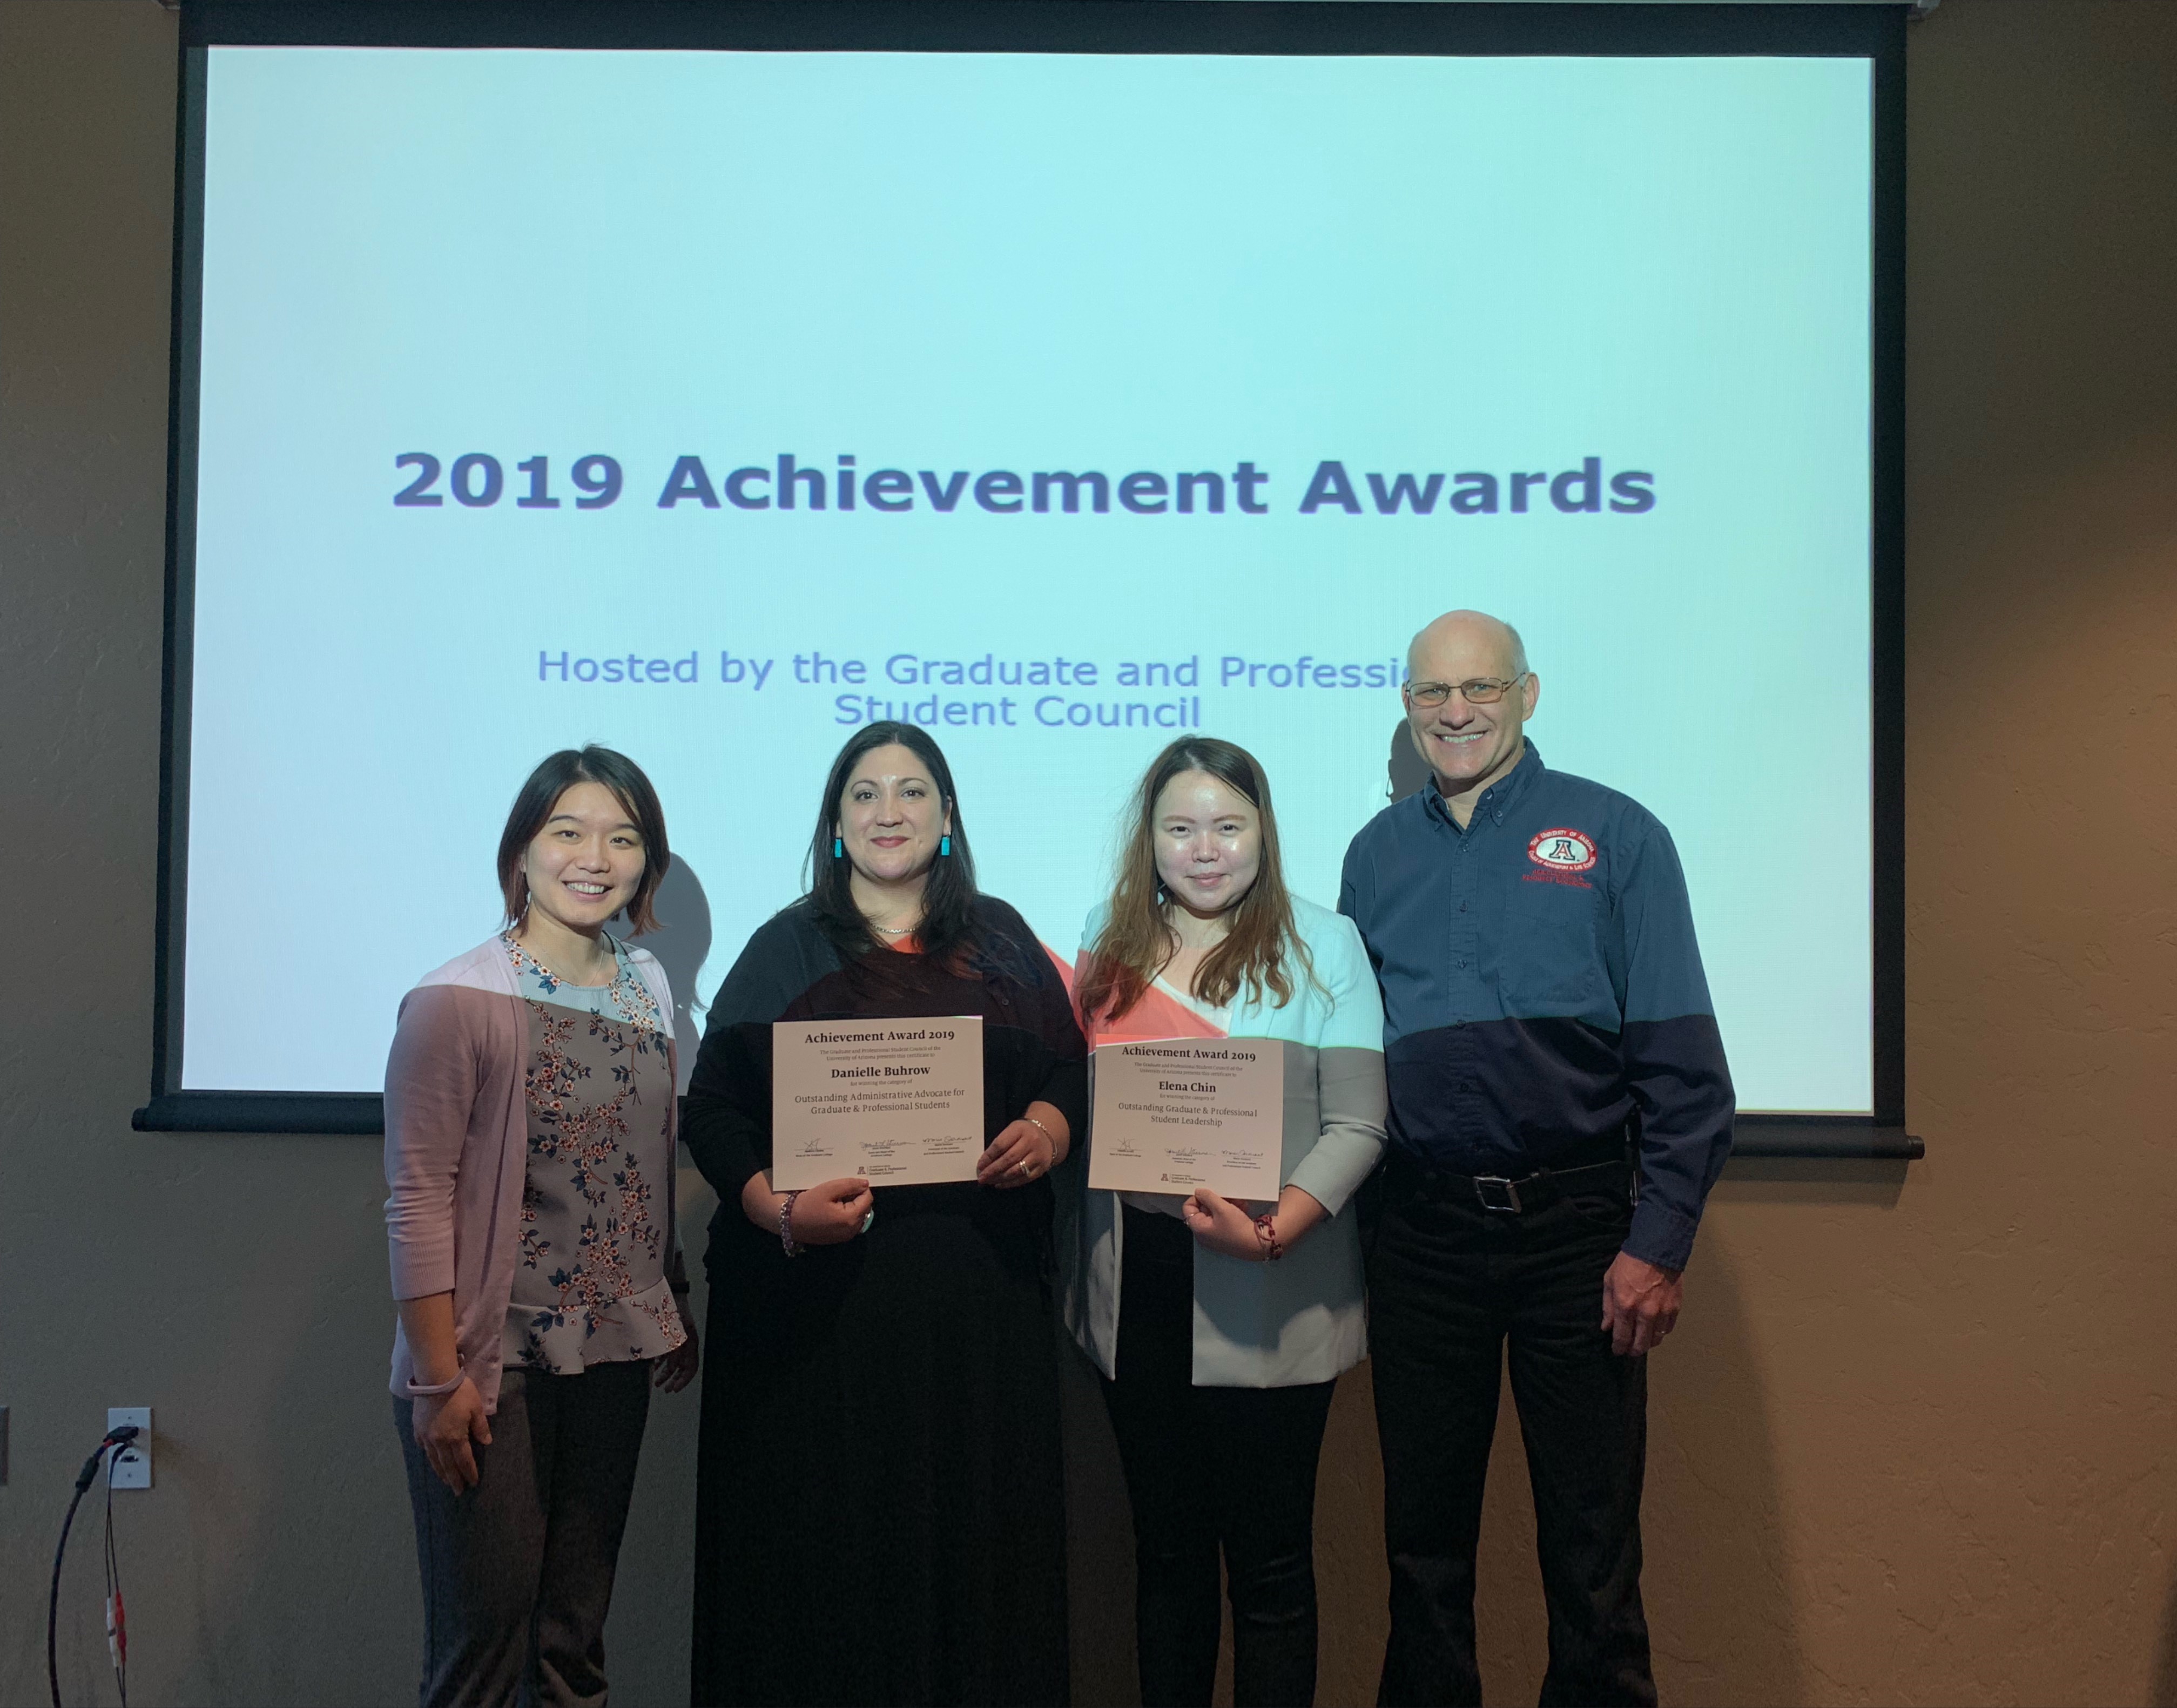 Danielle is pictured with Elena Chin, Na Zuo and Russ Tronstad after receiving award, University of Arizona, Tucson